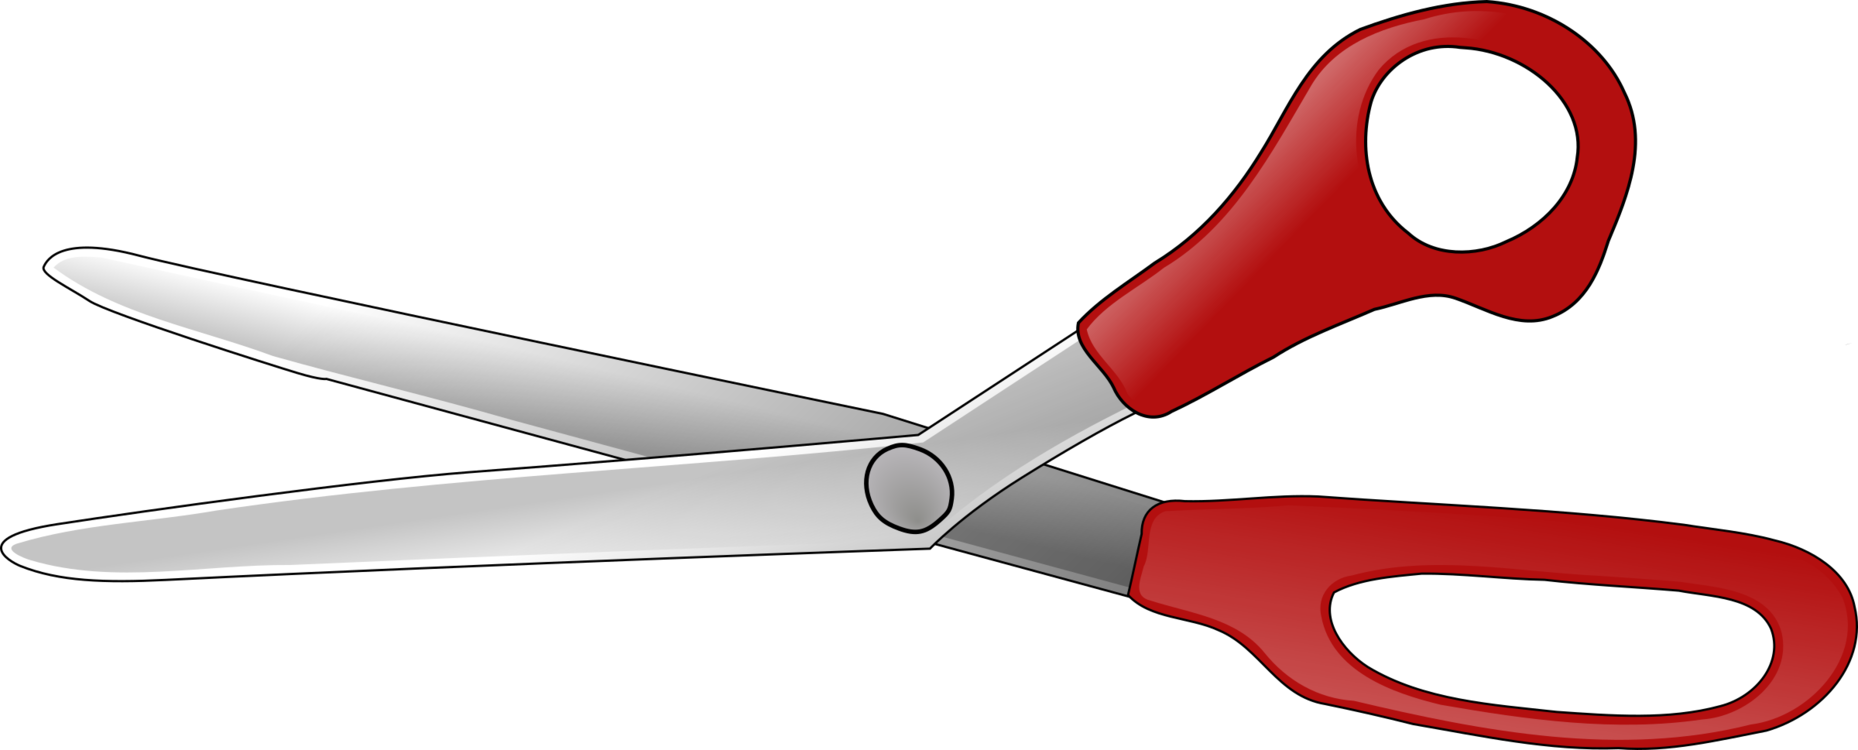 Scissors and cutter knife Royalty Free Vector Image